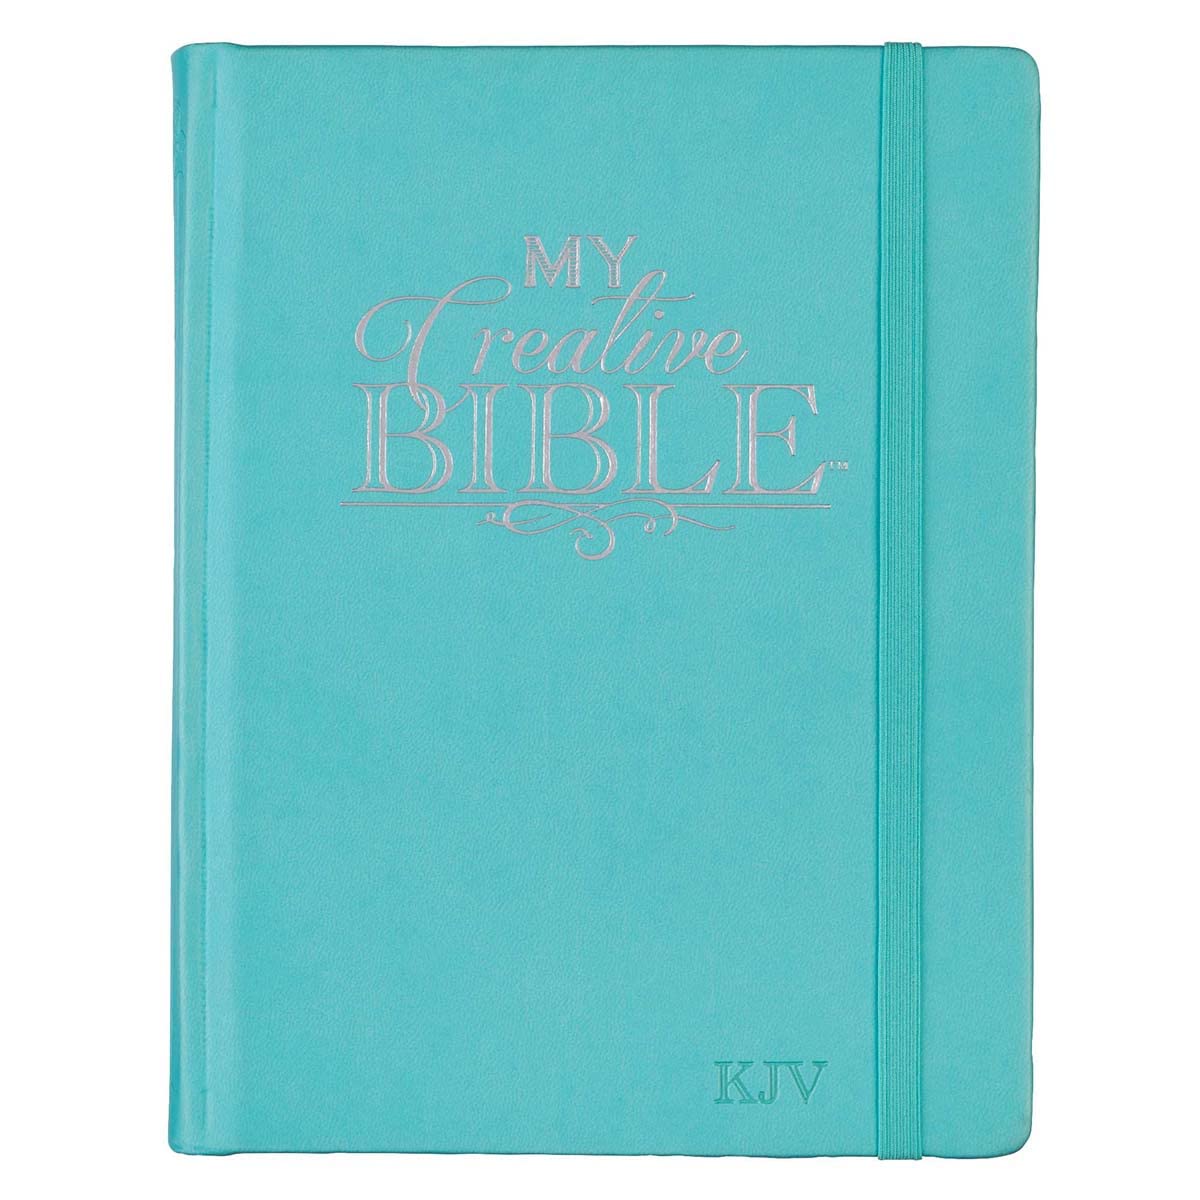 KJV Holy Bible, My Creative Bible, Teal Faux Leather Hardcover w/Ribbon Marker, King James Version